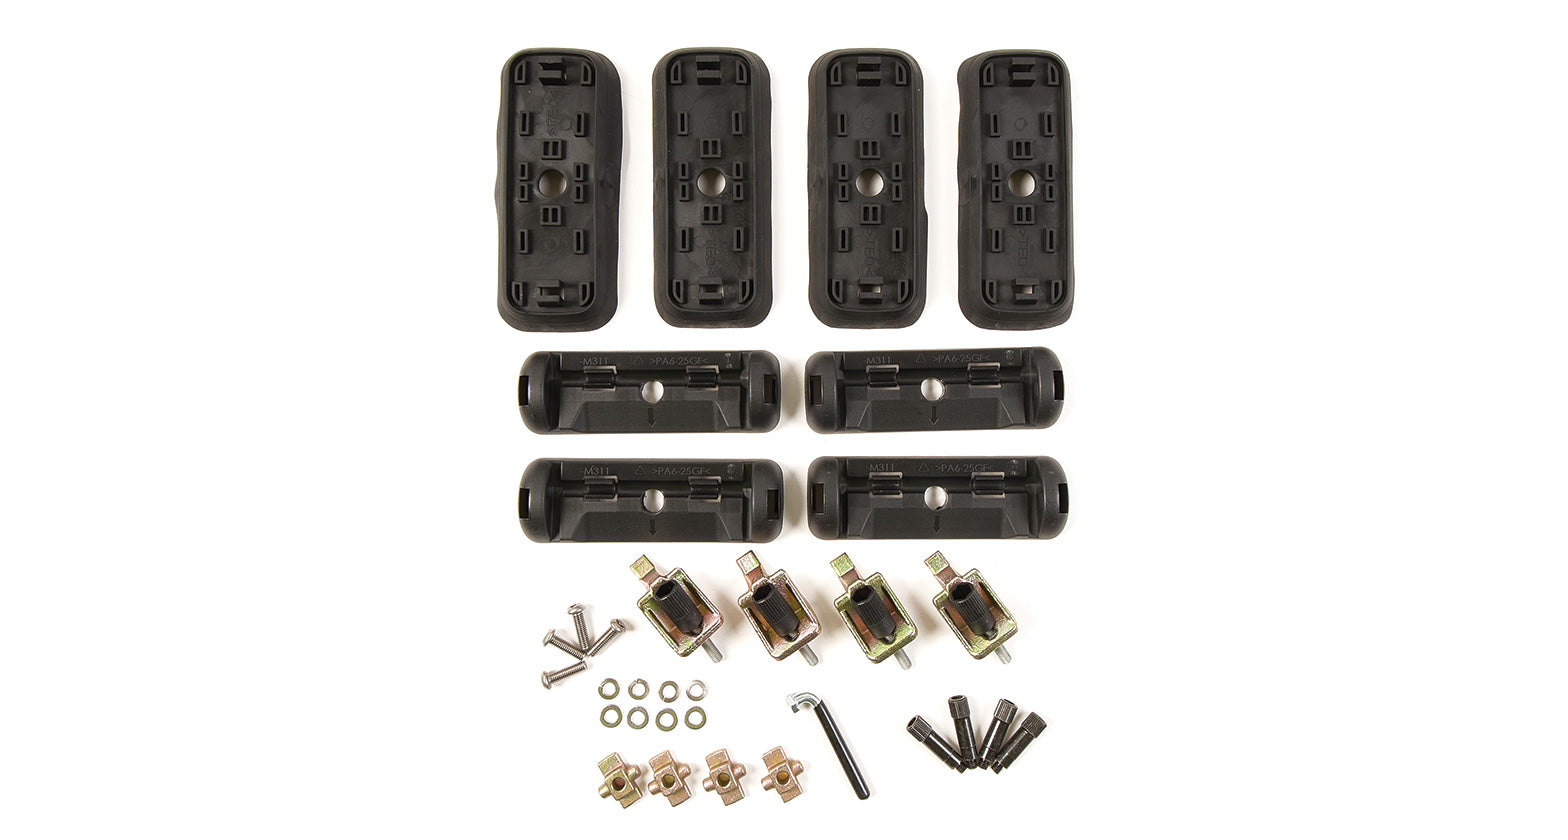 FIXED POINT KIT FOR RHINO 2500 MULTI FIT - DK478